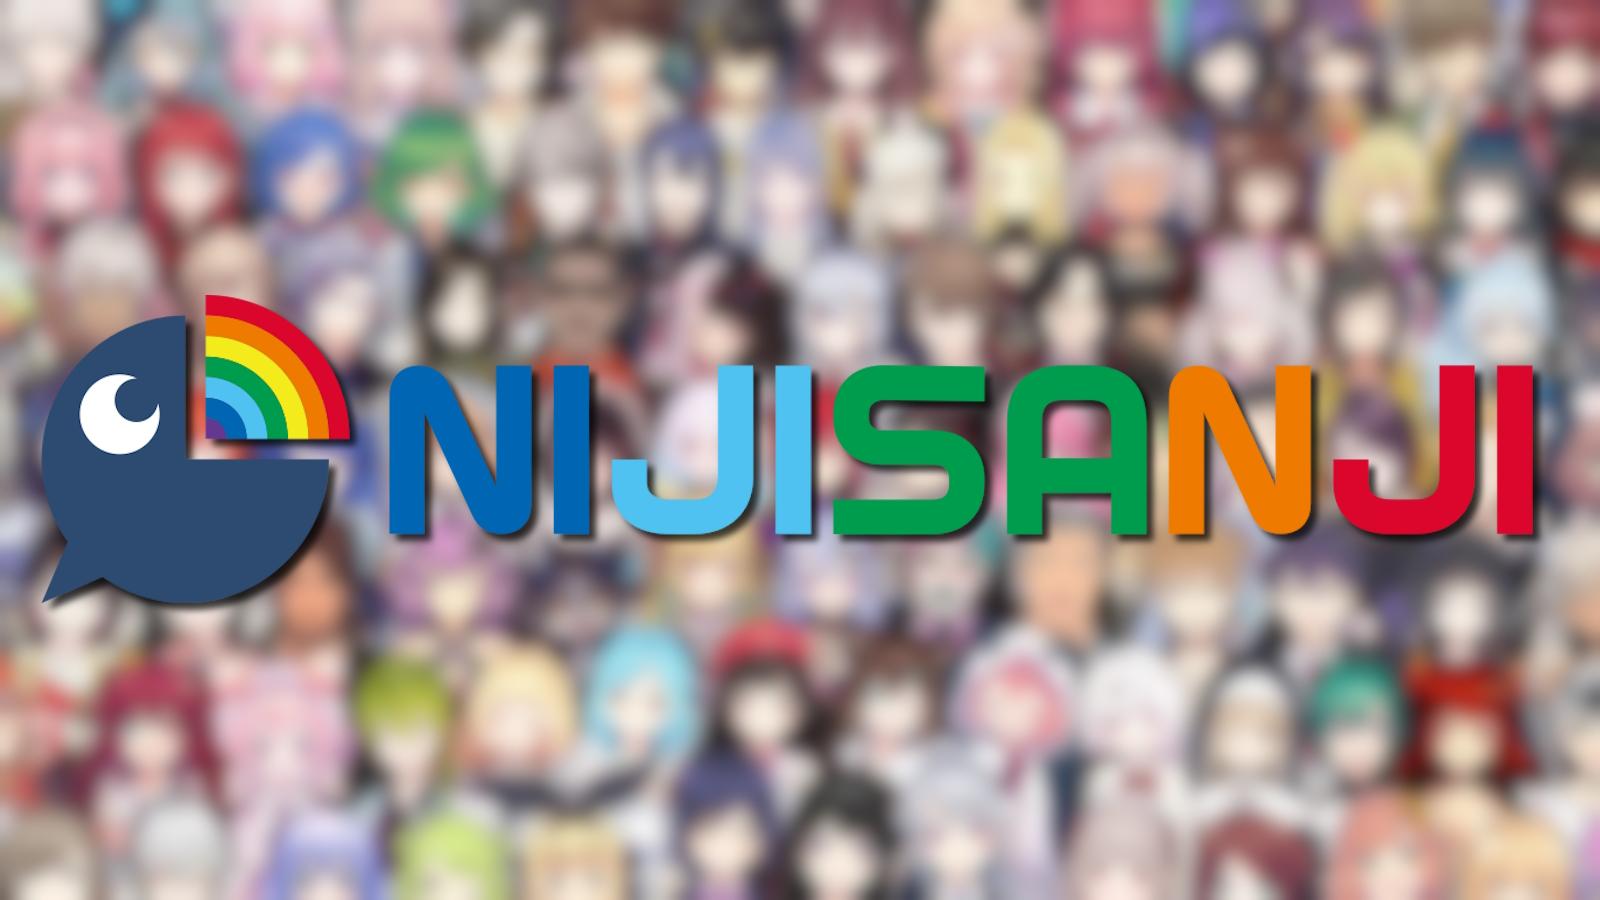 Nijisanji members blurred in background with agency logo in foreground.